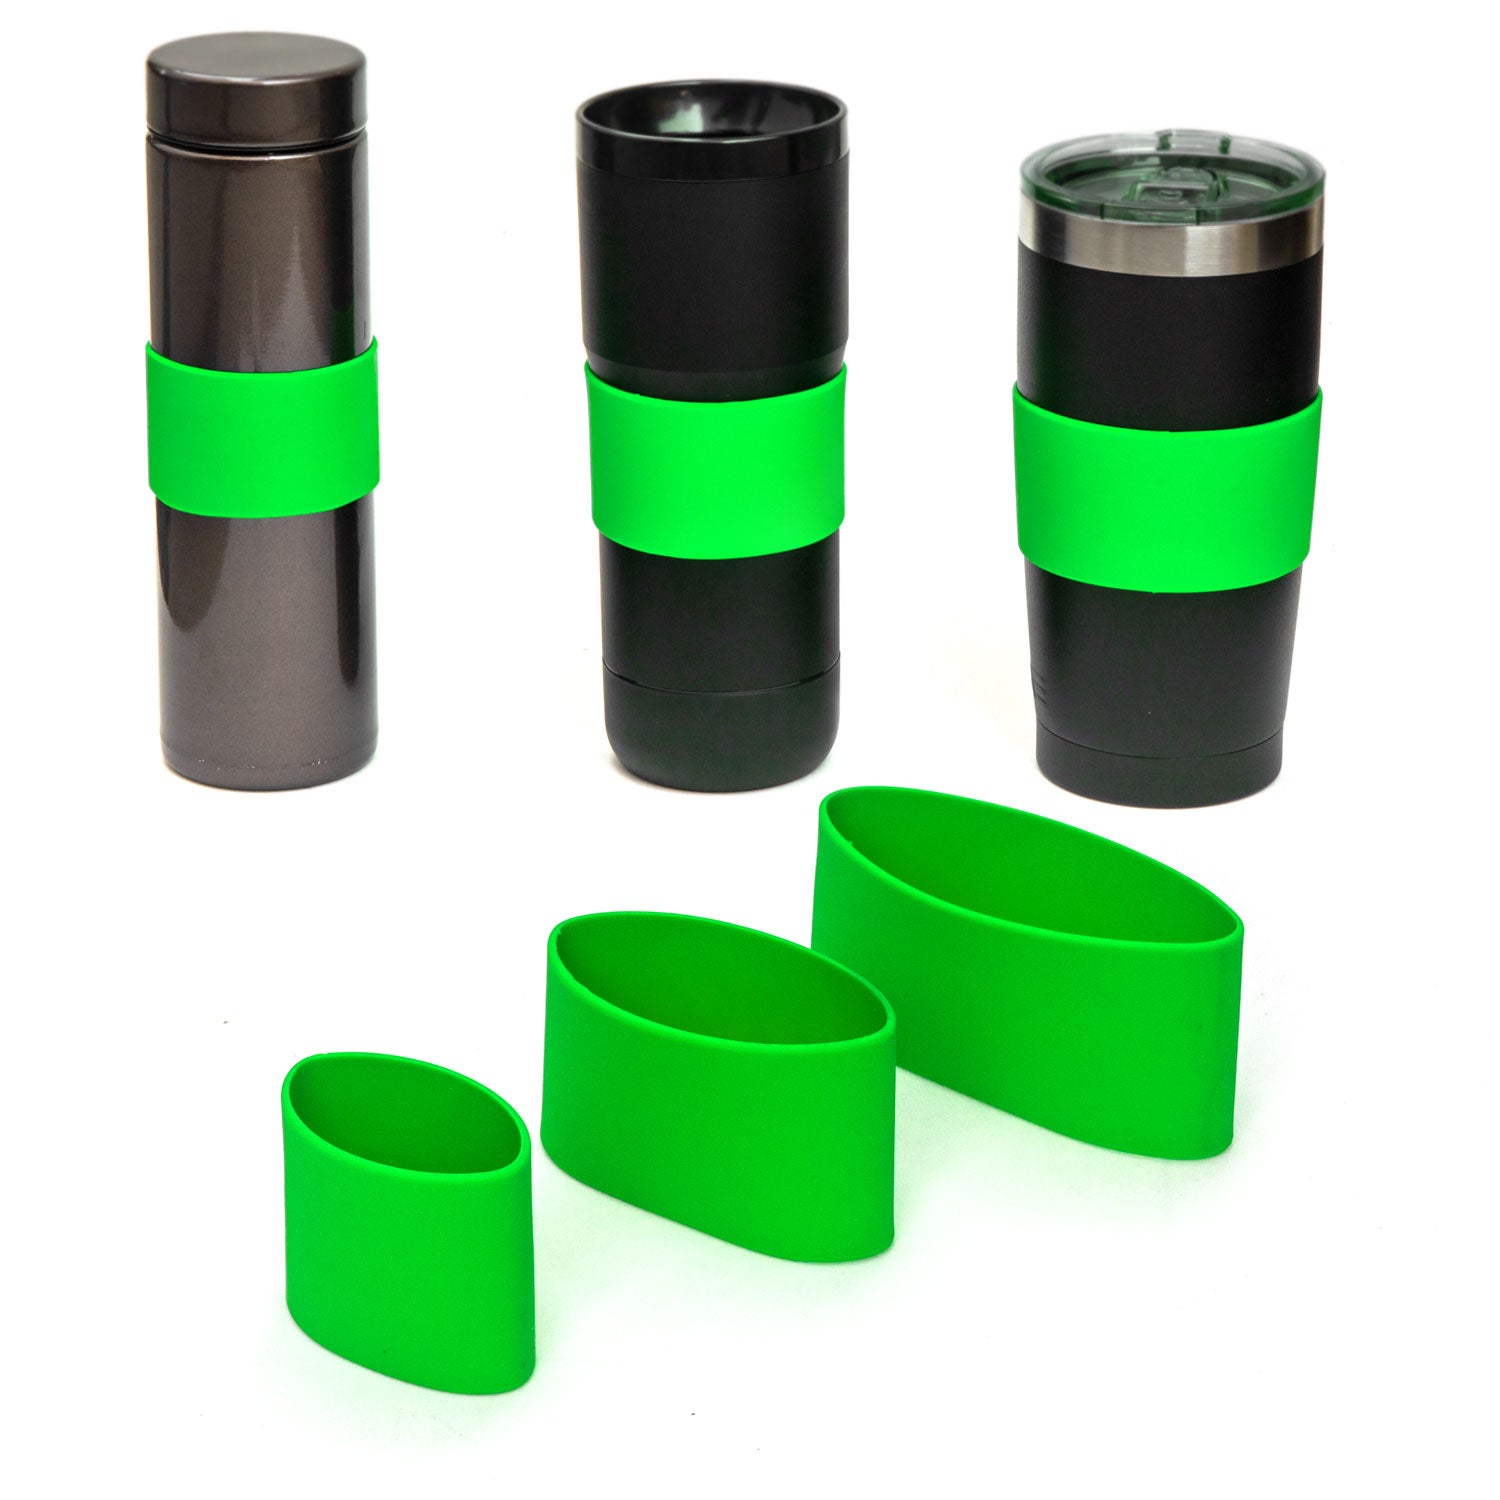 Grifiti Band Joes Silicone Grips Mugs Cups Thermos Dumbbells Knobs